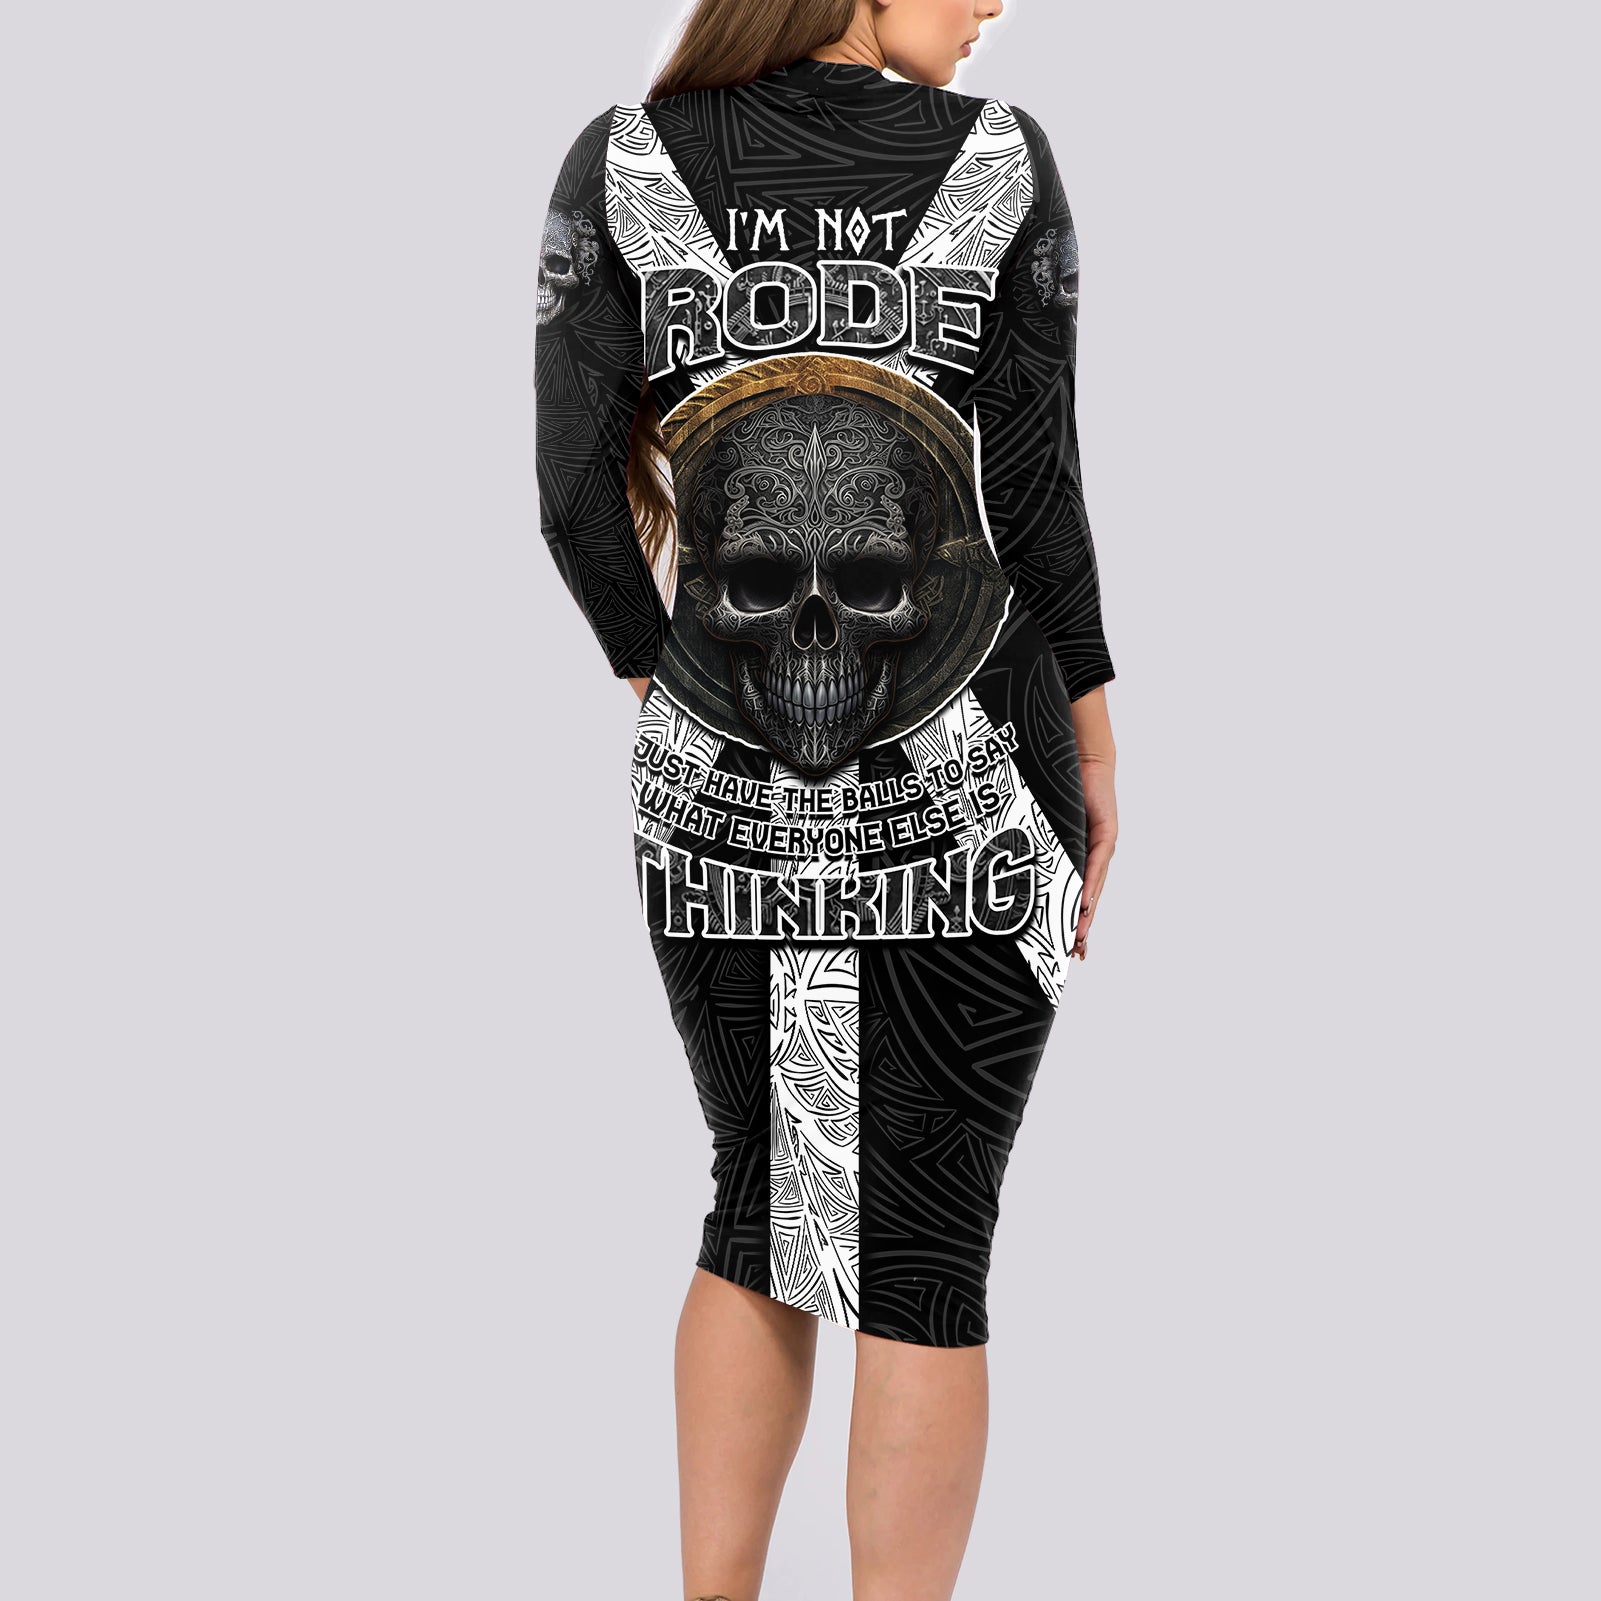 hell-pattern-skull-long-sleeve-bodycon-dress-im-not-rode-i-just-hace-the-balls-to-say-what-everyone-else-is-thinking